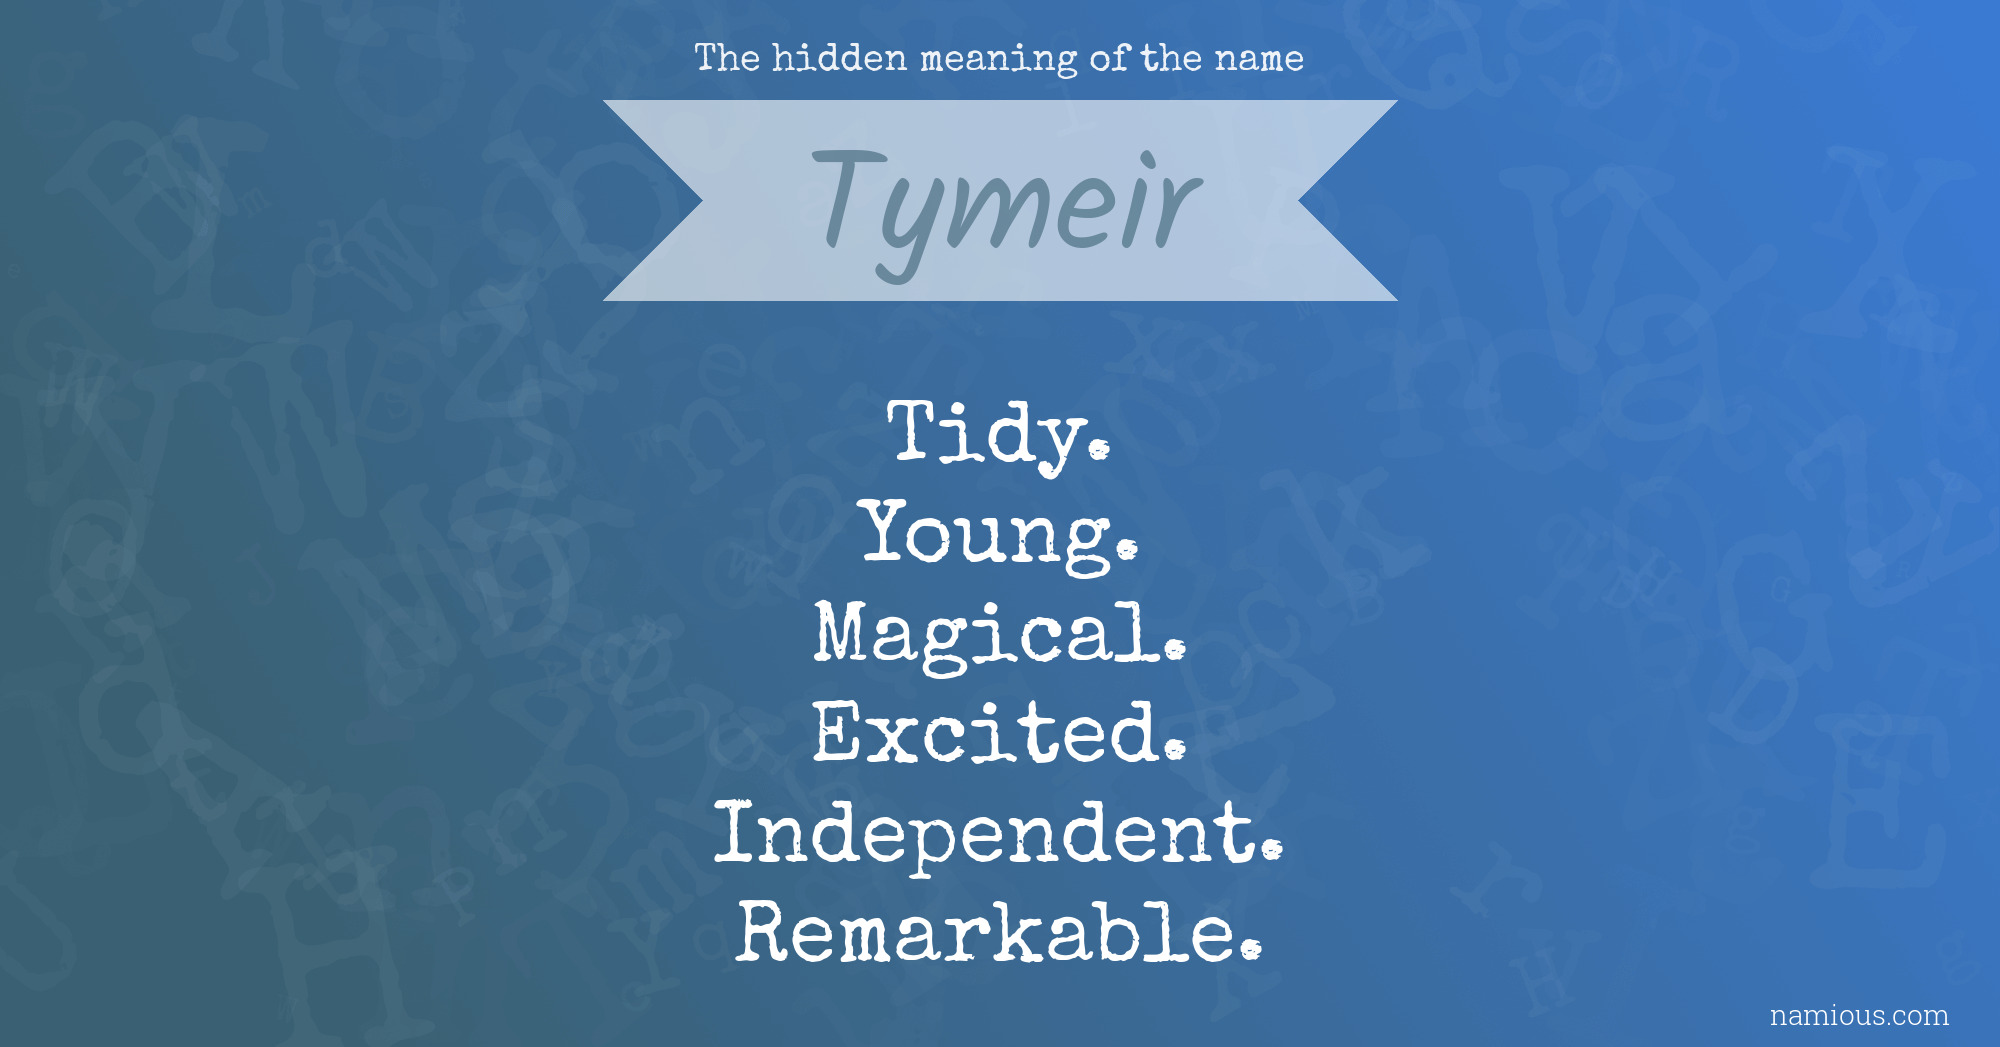 The hidden meaning of the name Tymeir